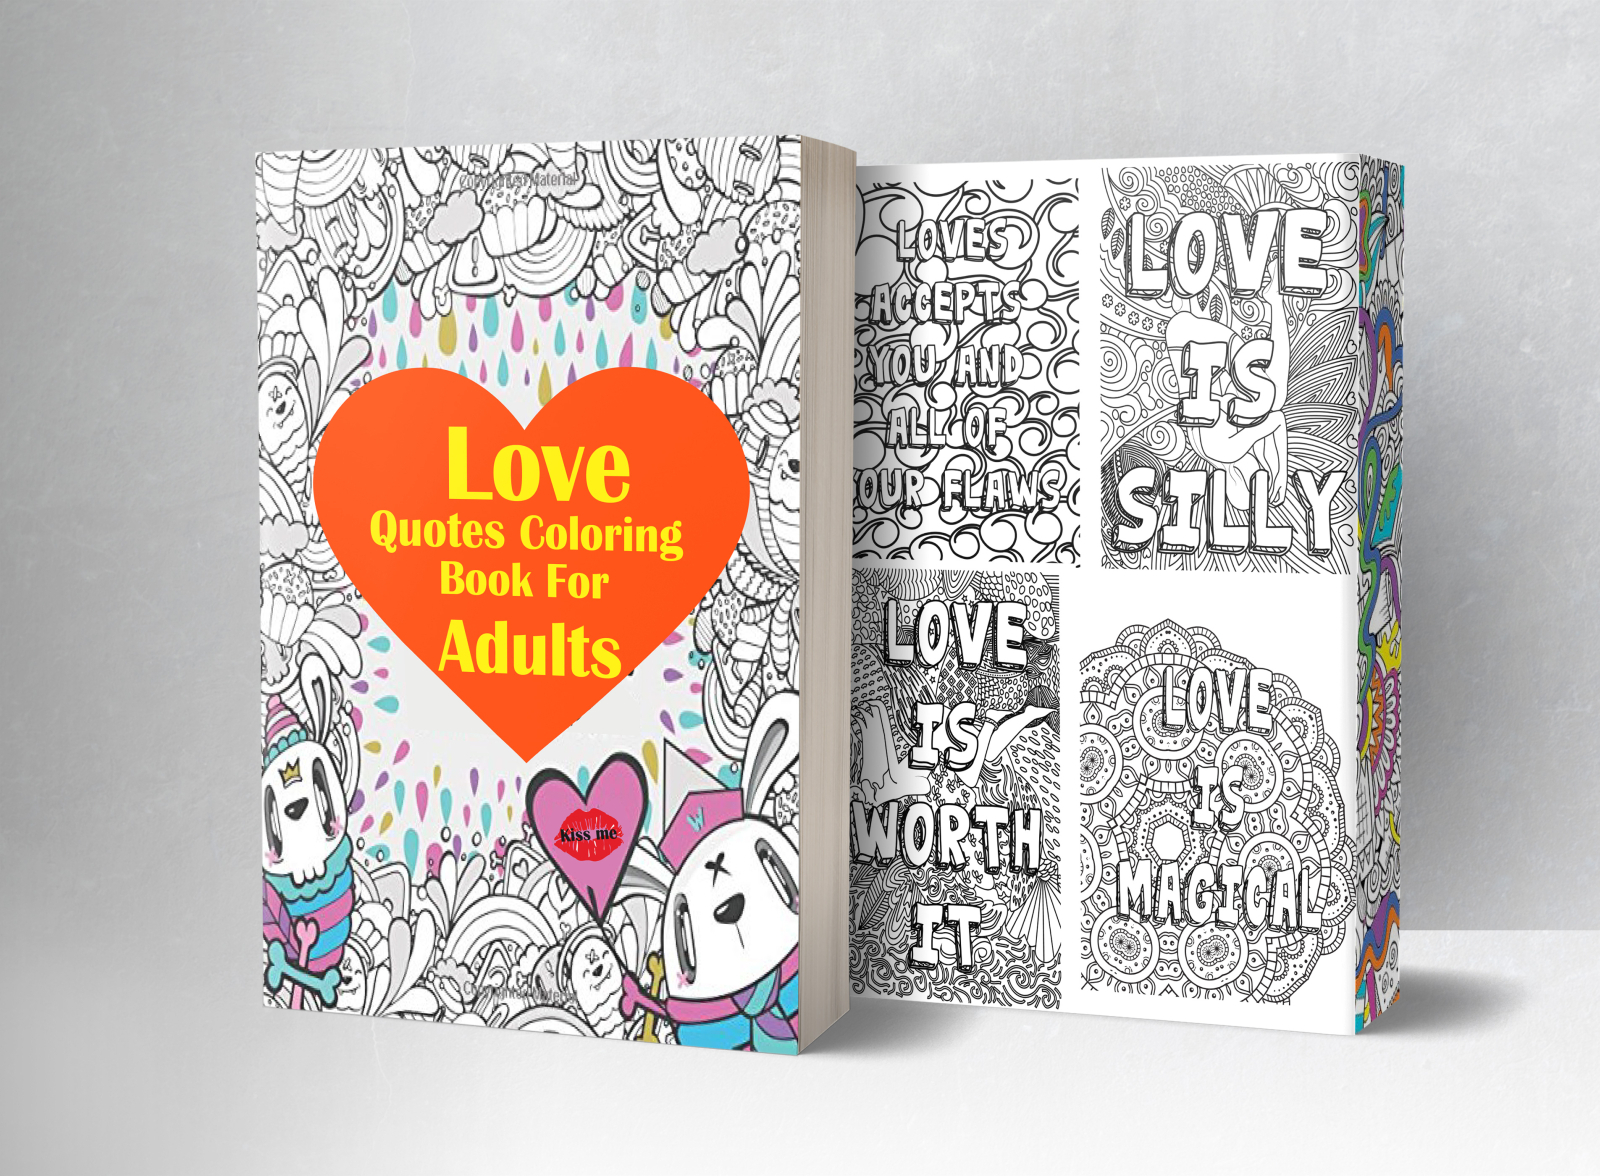 Coloring Book cover by Shahnaz, Chowdhury on Dribbble